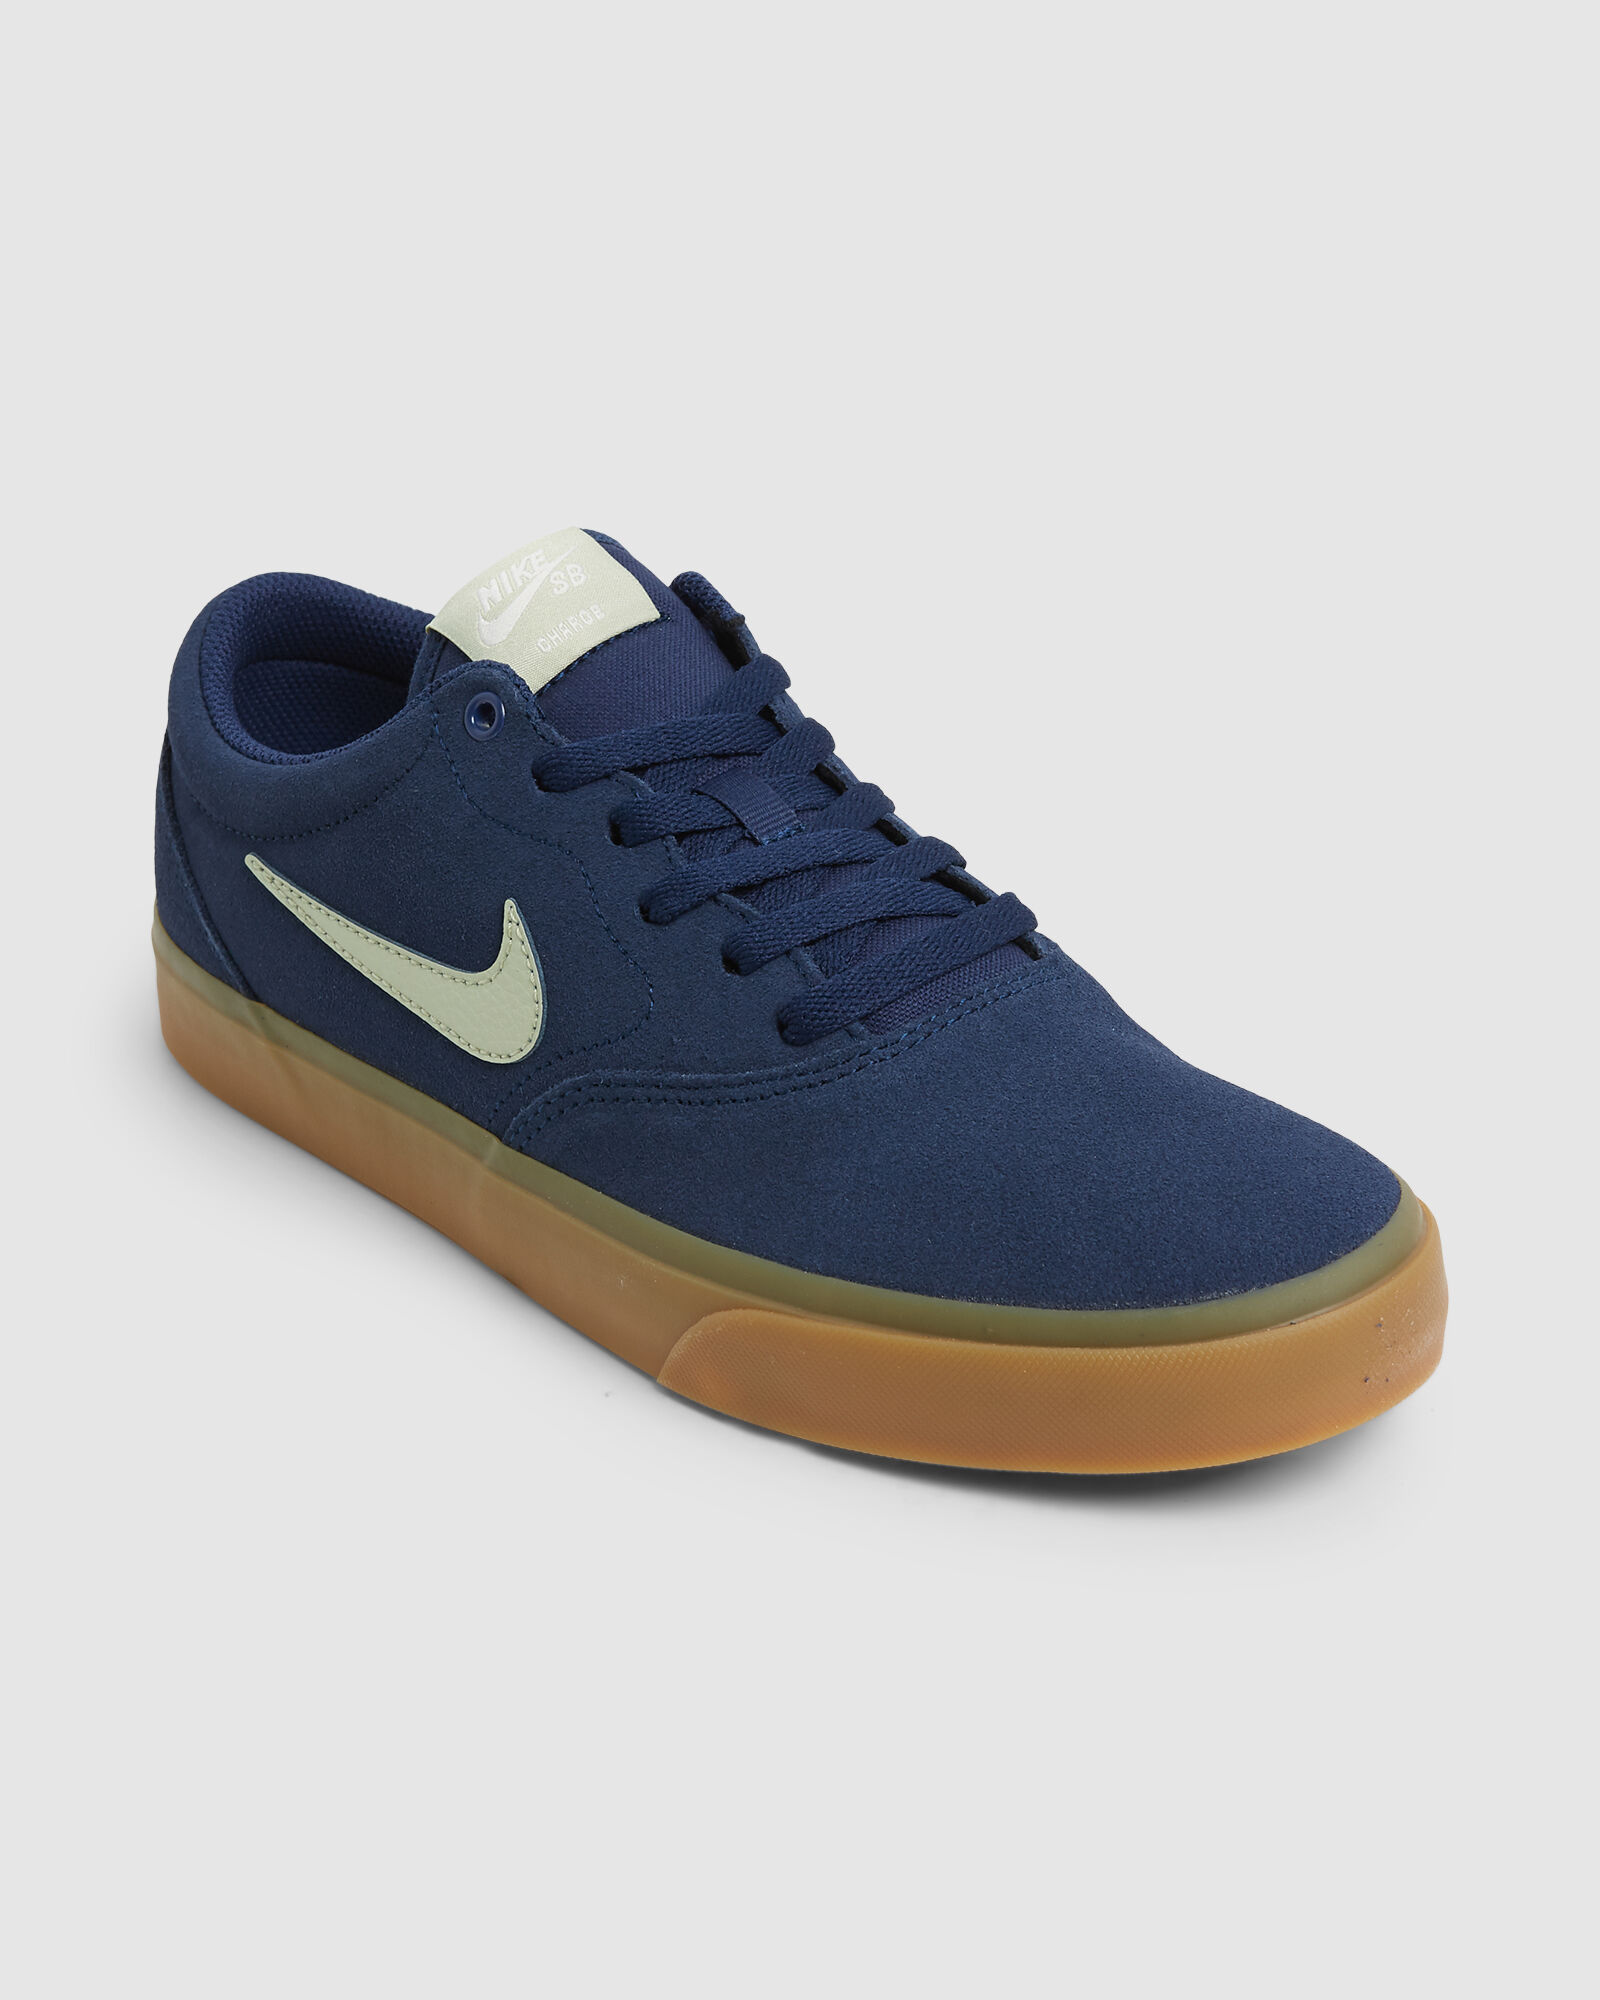 Mens Nike Sb Charge Suede Navy/gum by 